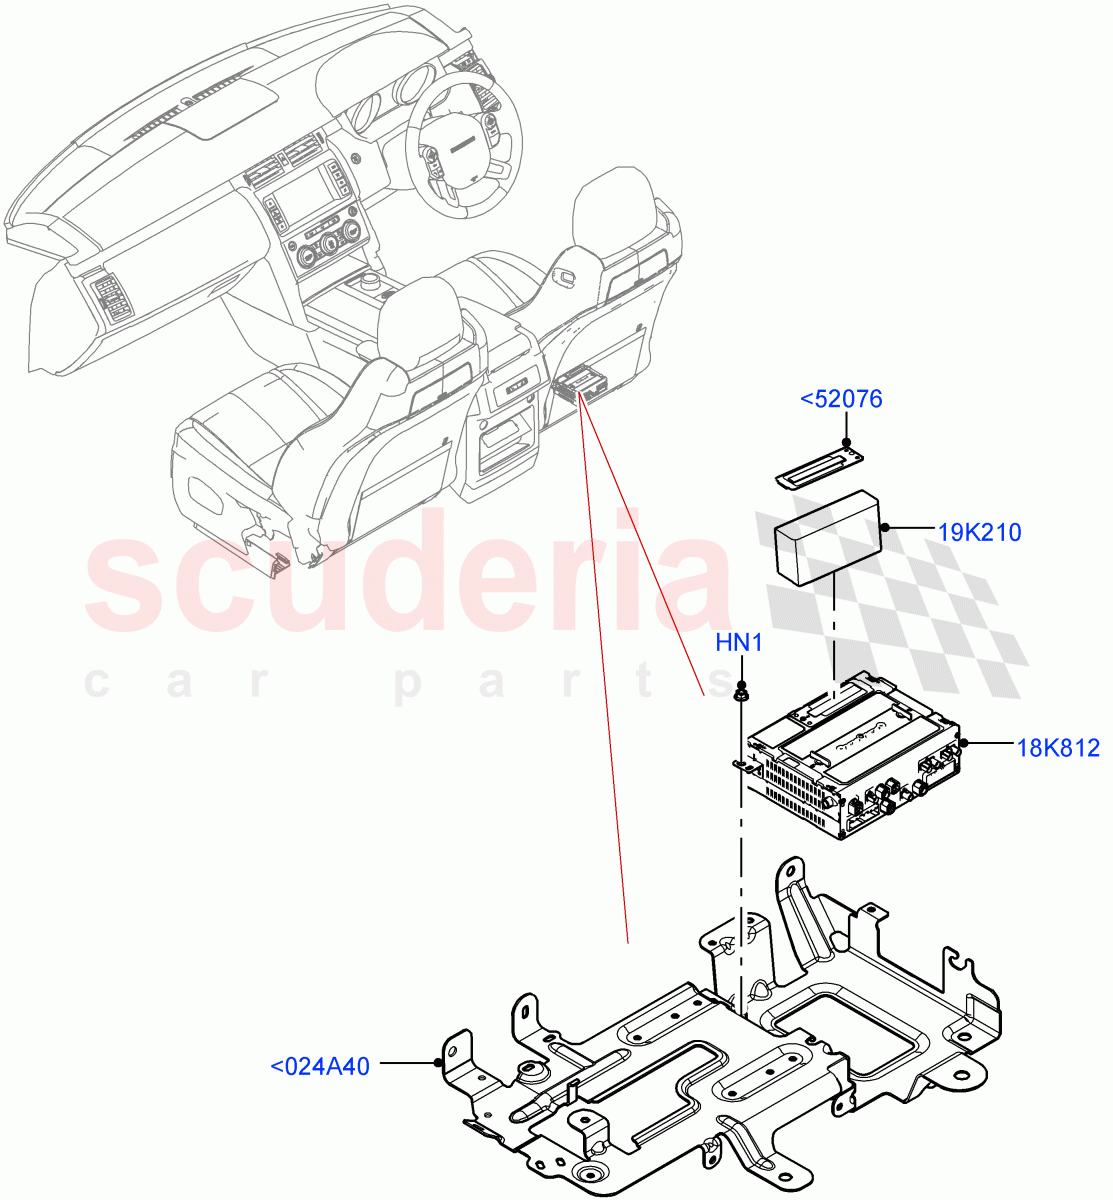 Family Entertainment System(Nitra Plant Build)((V)FROMM2000001) of Land Rover Land Rover Discovery 5 (2017+) [2.0 Turbo Diesel]